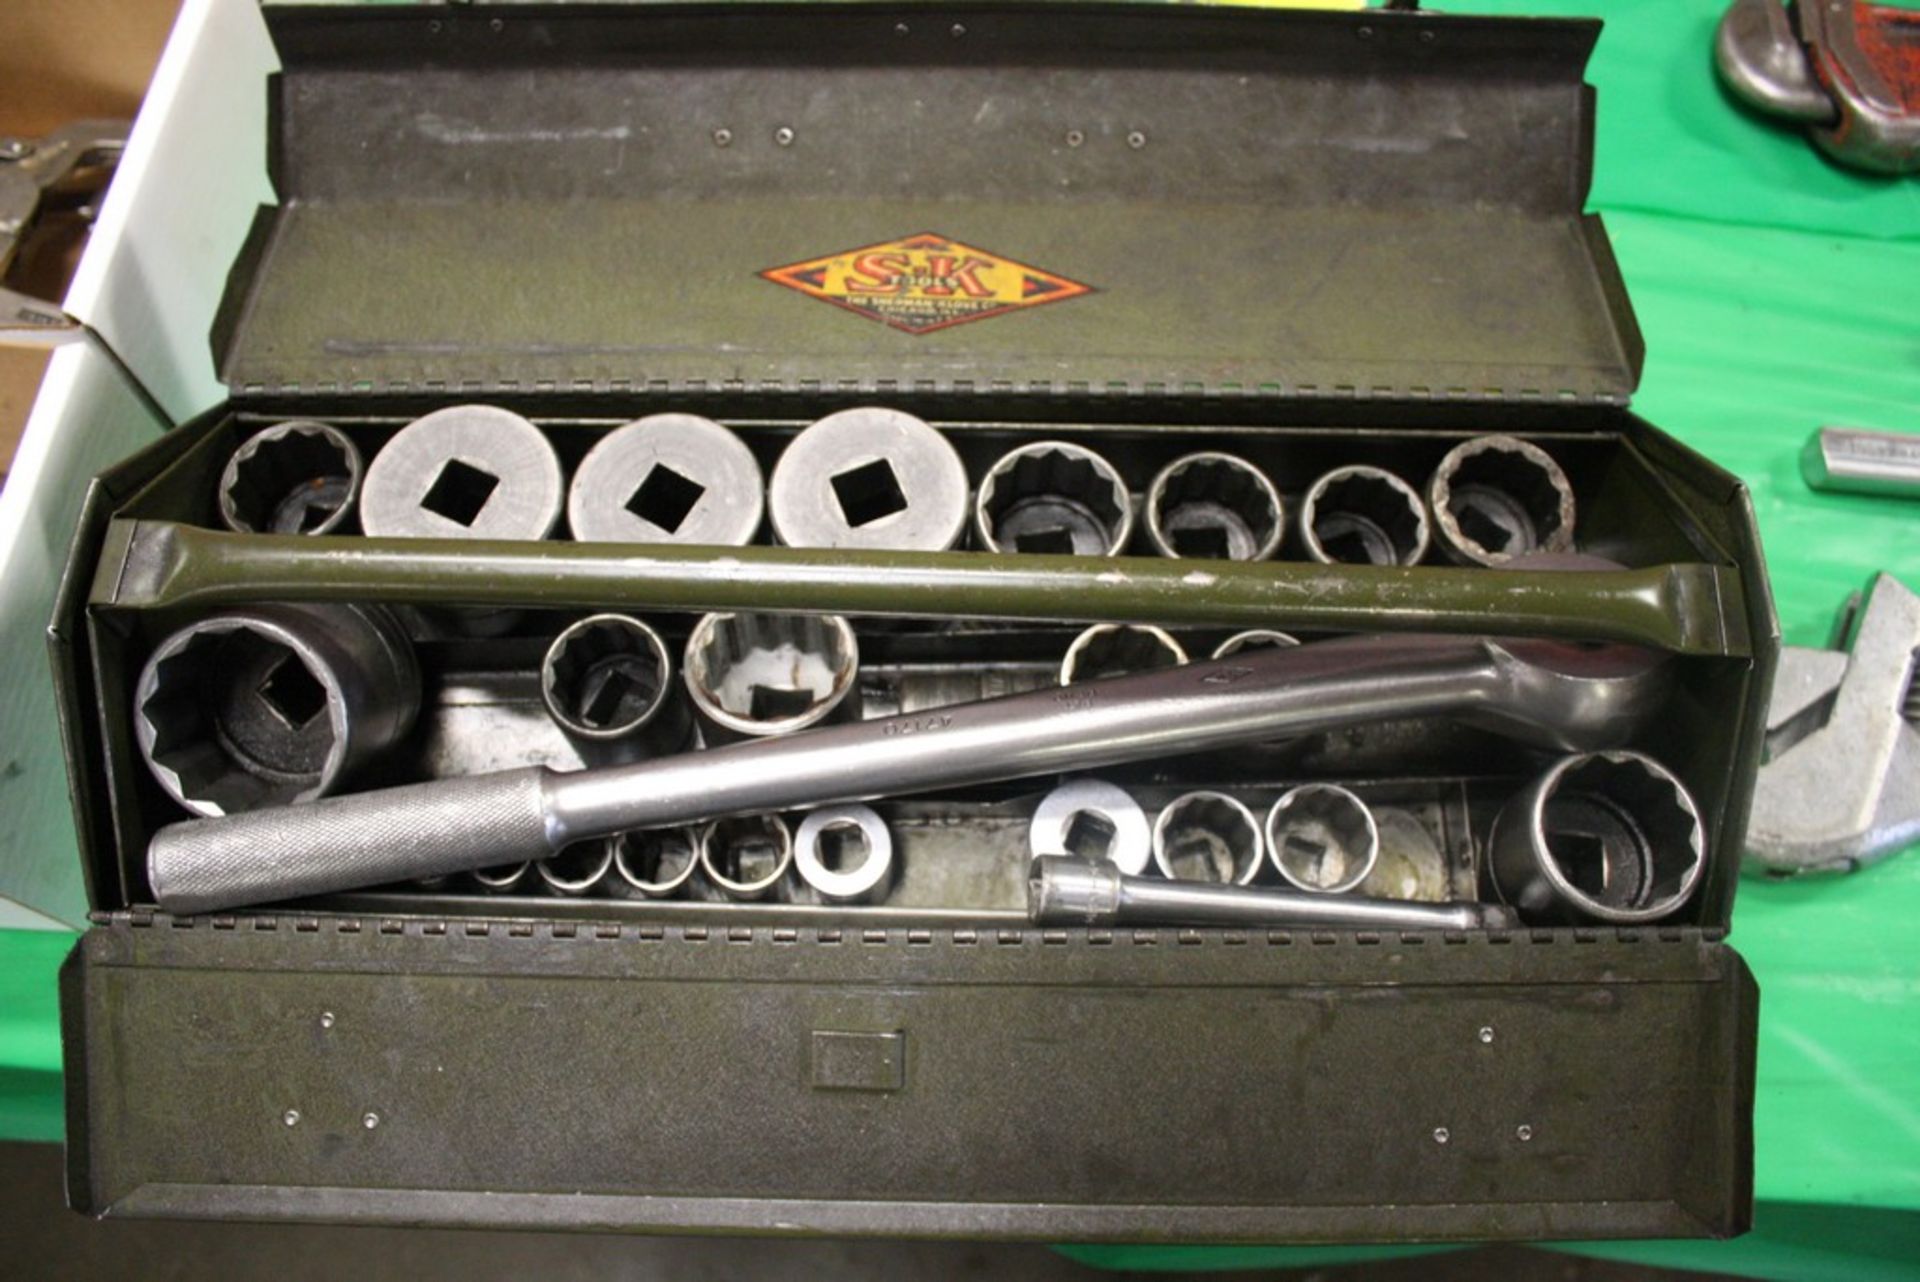 S & K 3/4” RATCHET SET IN CASE WITH 3/4” & 1/2” SOCKETS